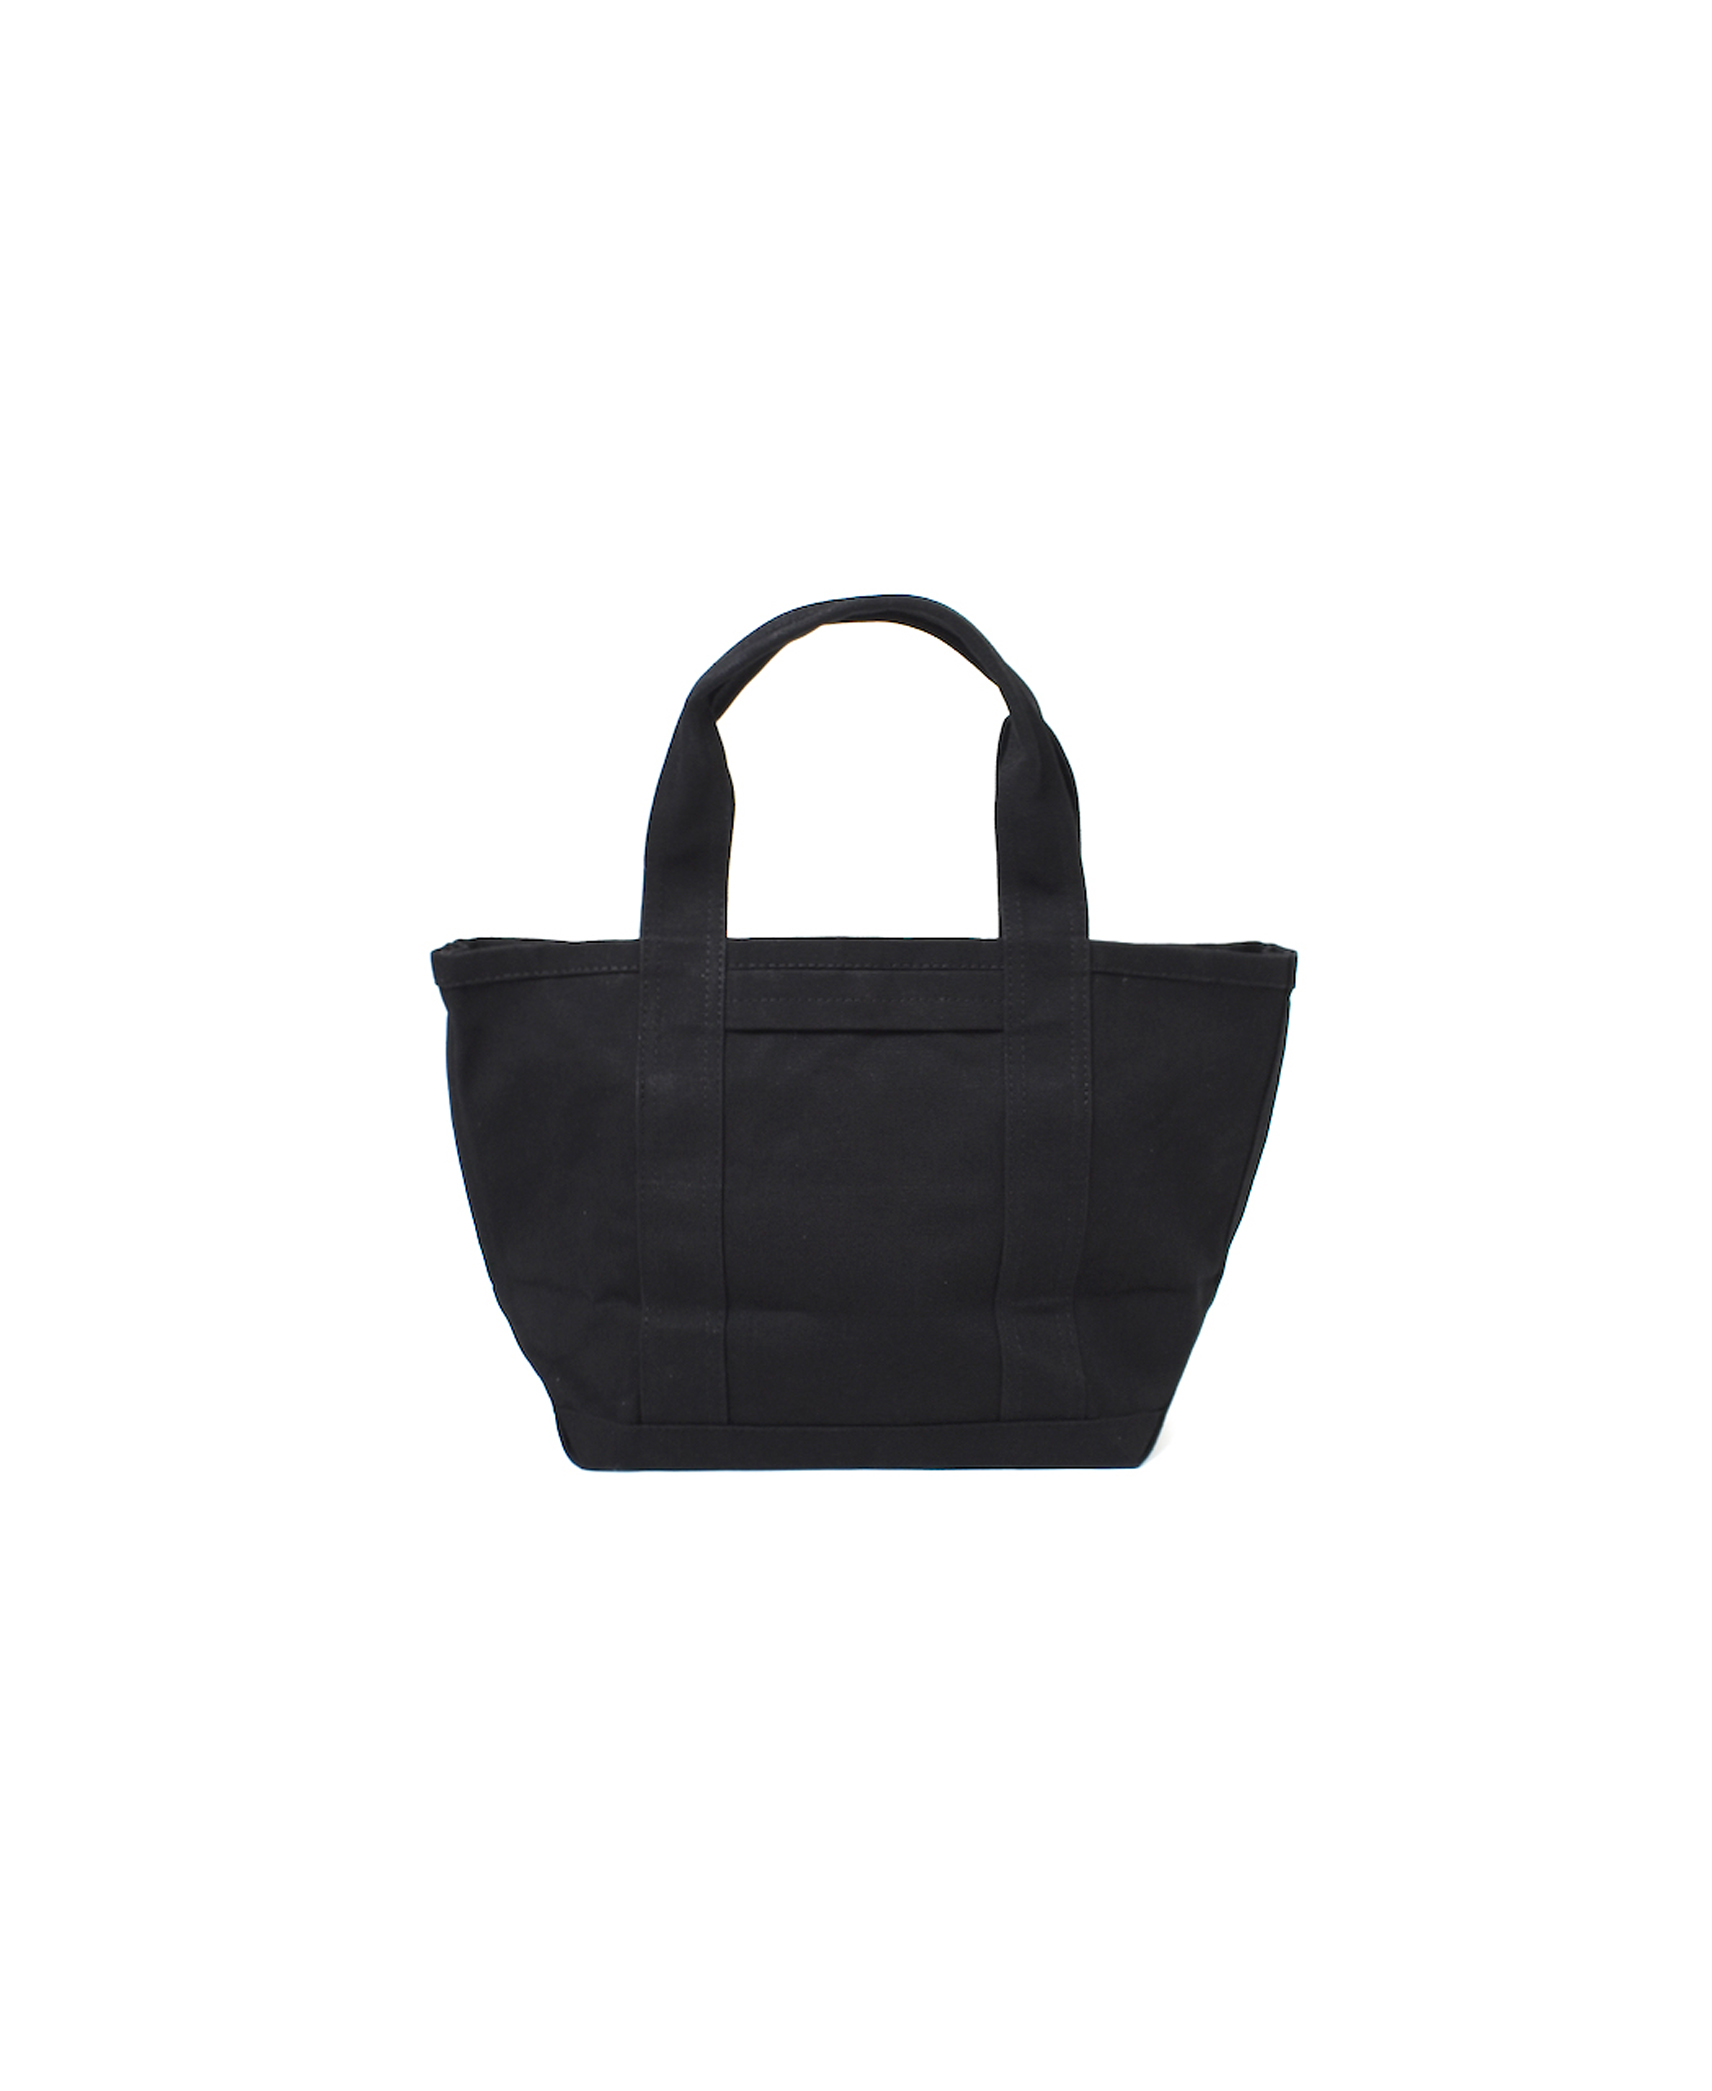 PNAM1471 (バッグ) 14oz COTTON CANVAS 2WAY INSIDE DOUBLE POCKET SMALL TOTE BAG